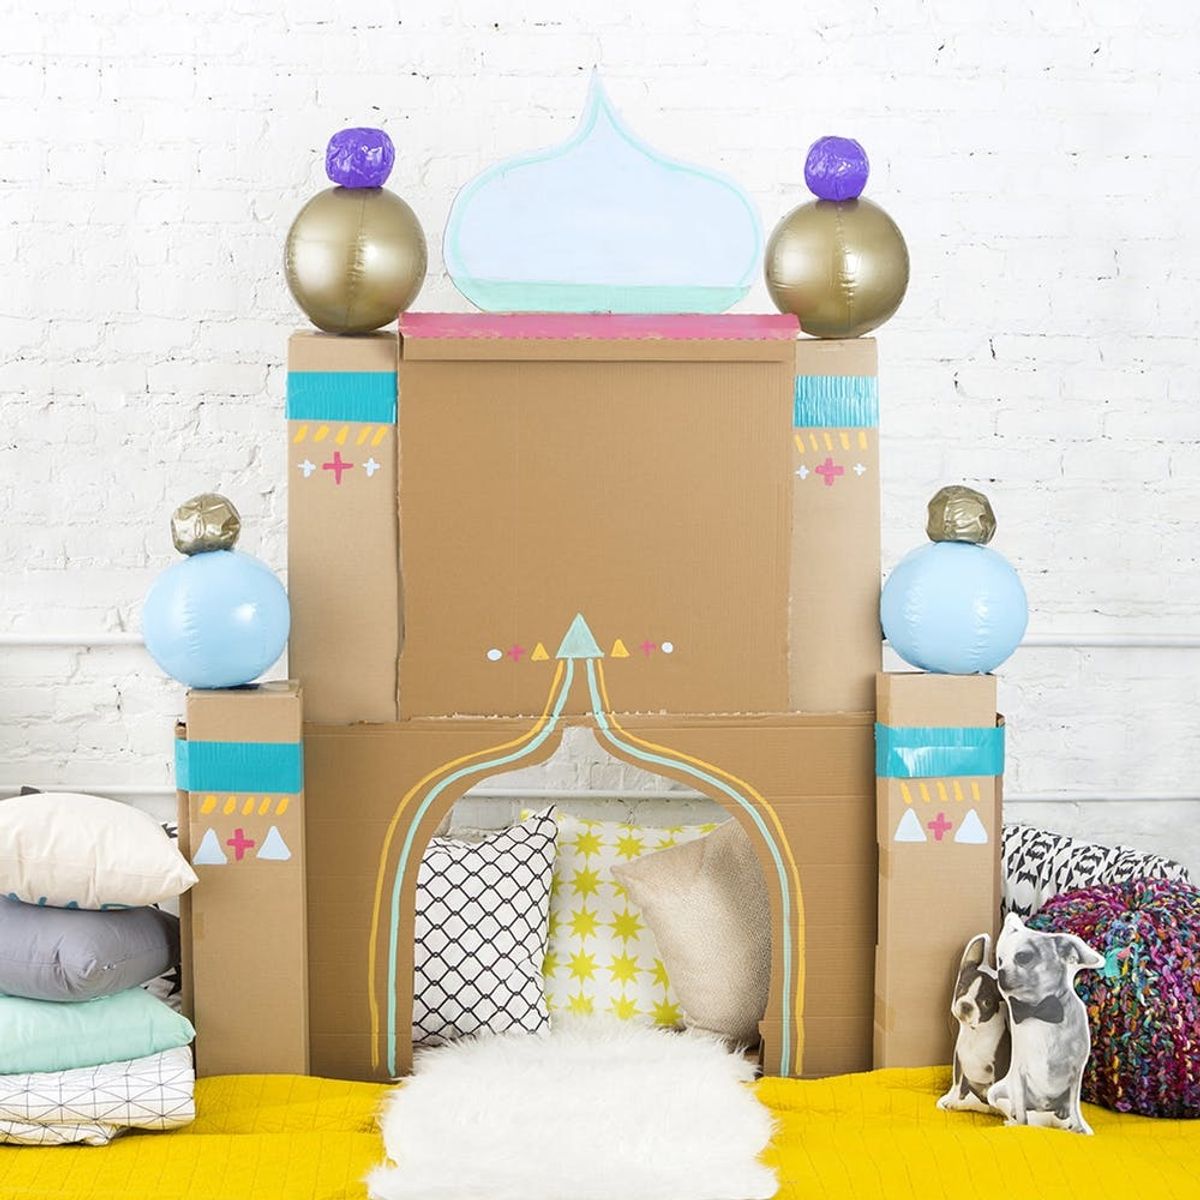 5 Ways to Throw the Most EPIC Aladdin-Themed Party